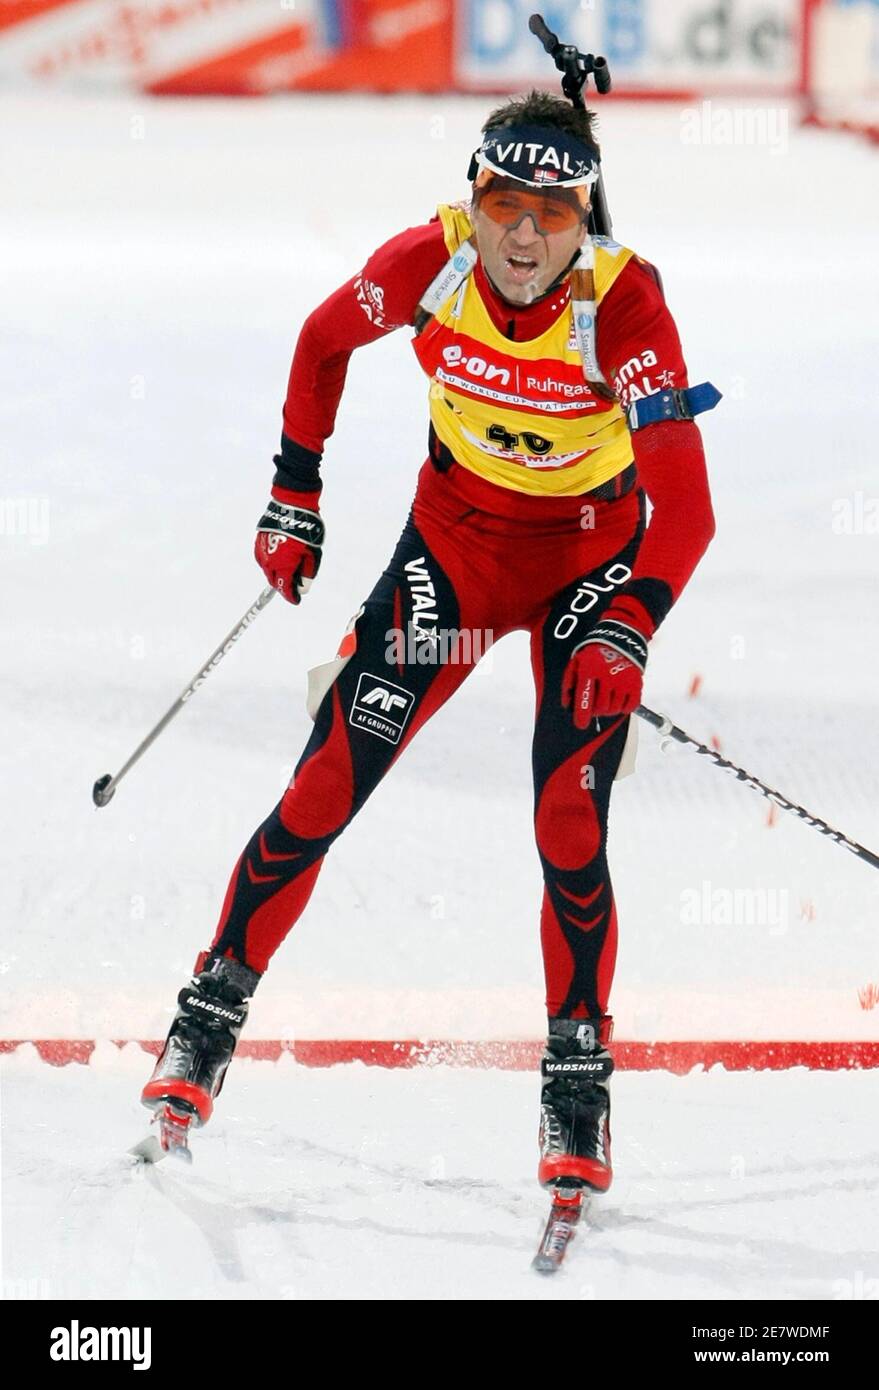 Ole Einar Bjorndalen of Norway crosses the finish line to take second place  in the men's 10 km sprint at the Biathlon World Cup Final in the Siberian  town of Khanty-Mansiysk, 2,000